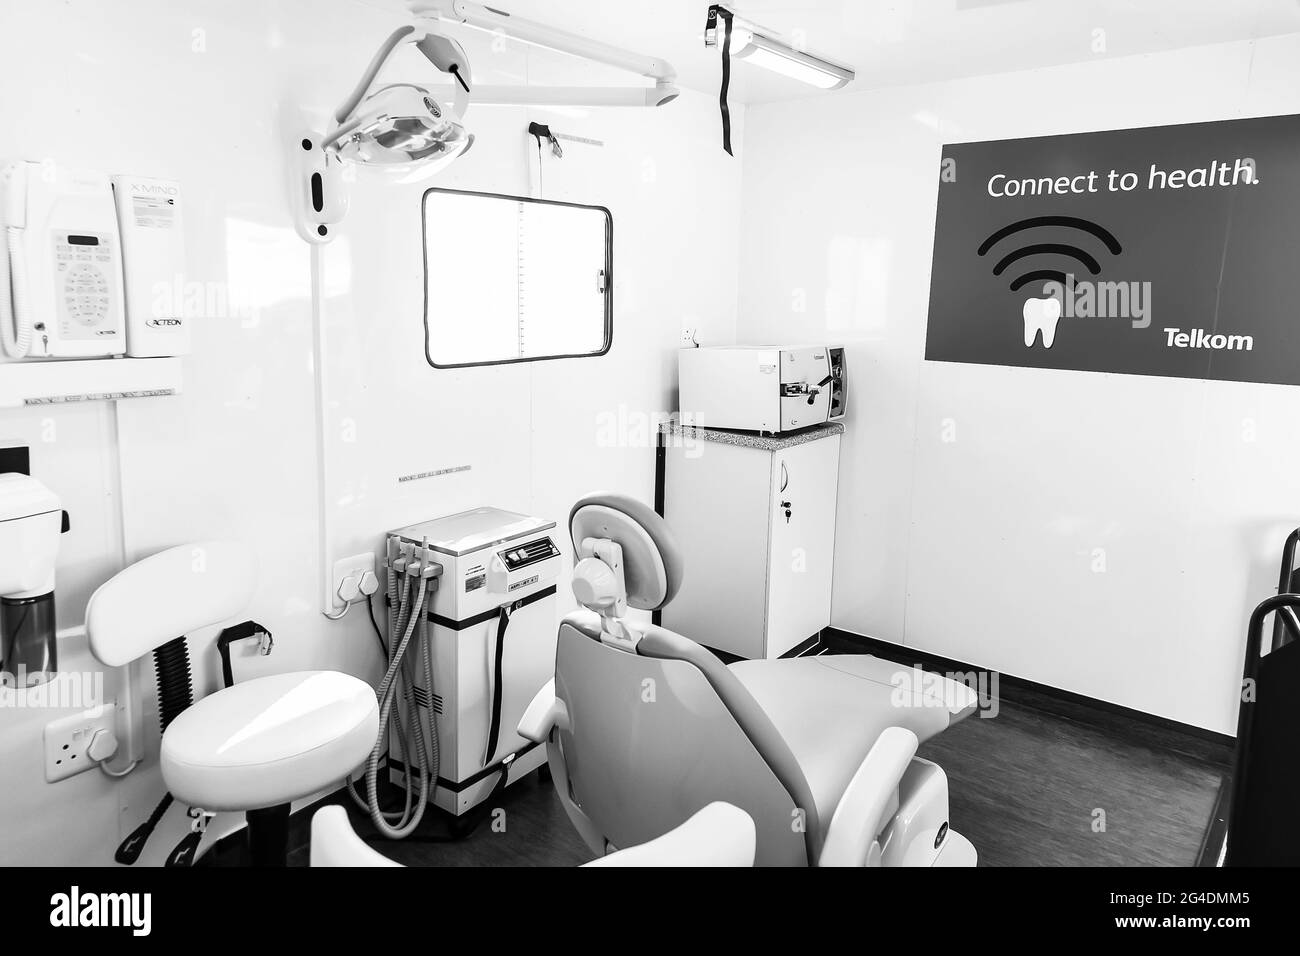 JOHANNESBURG, SOUTH AFRICA - Mar 13, 2021: Johannesburg, South Africa - May 14 2015: Mobile Clinic for Mother and Child and Dental Services Stock Photo